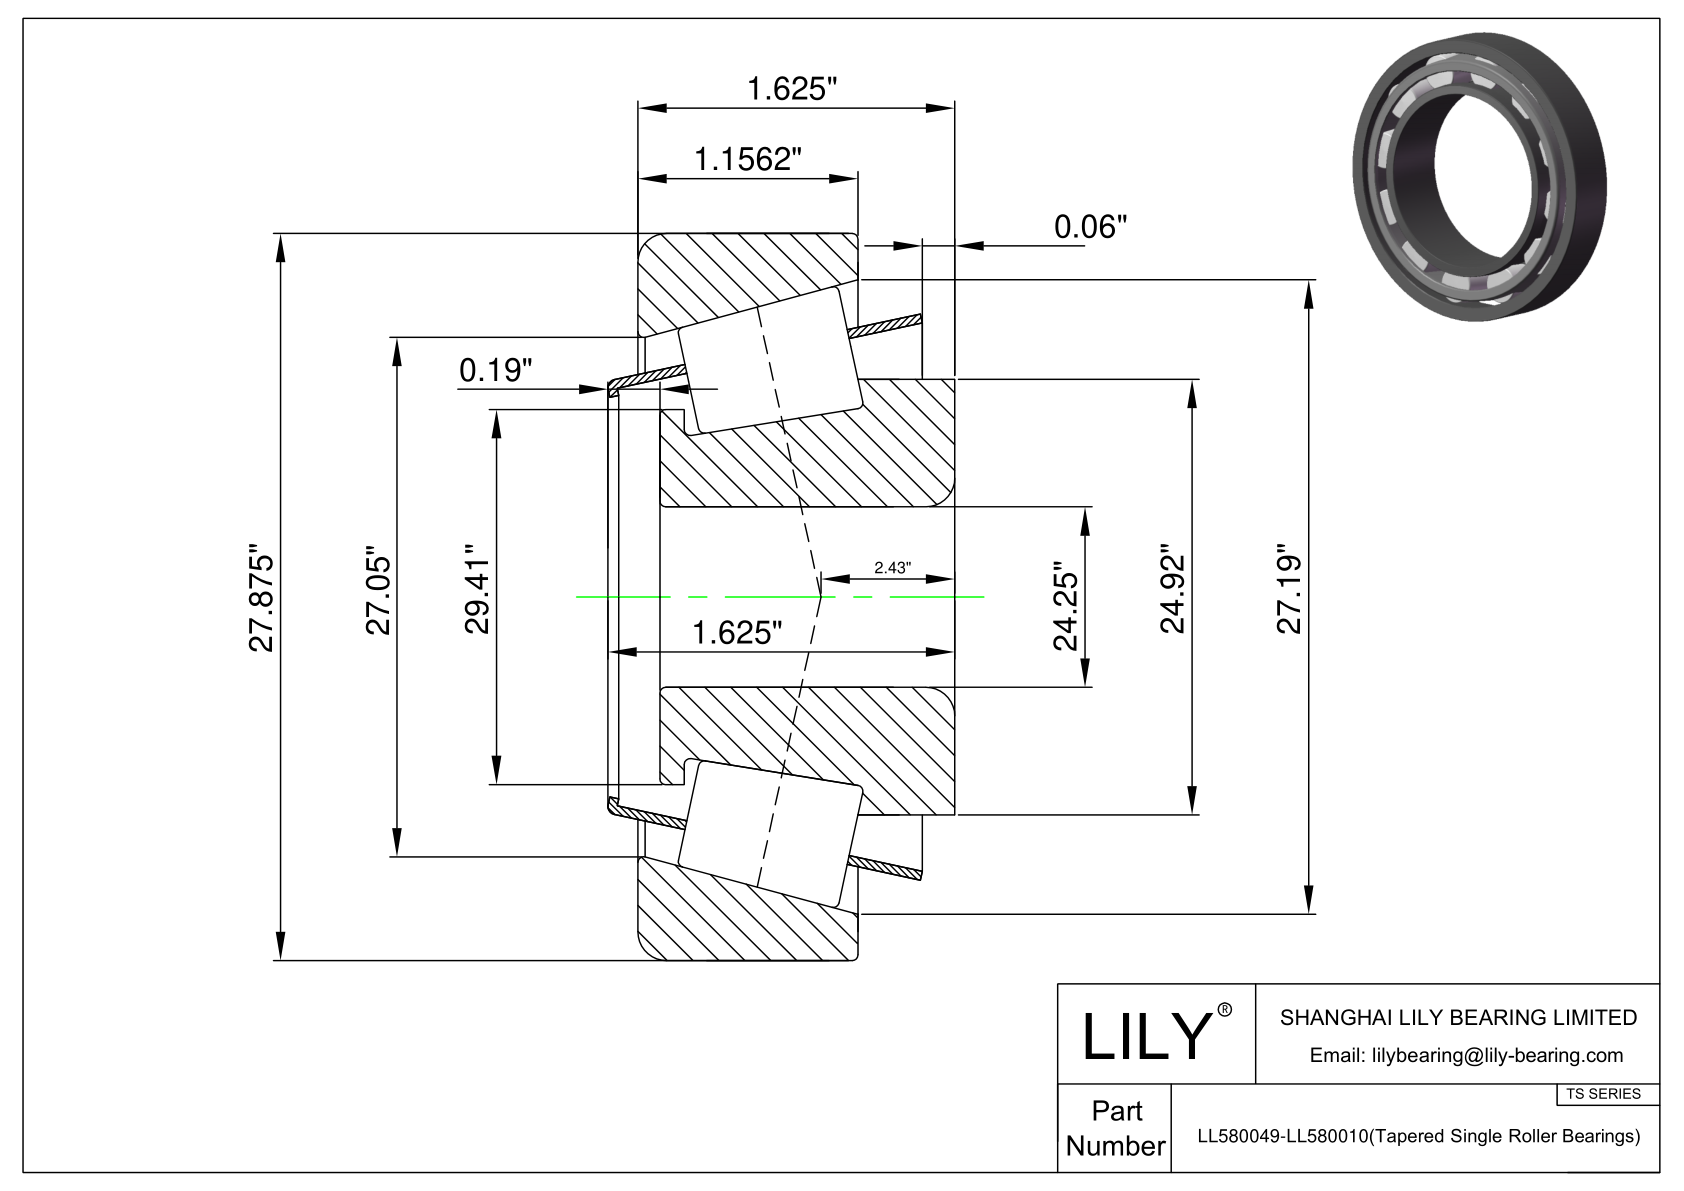 LL580049-LL580010 TS (Tapered Single Roller Bearings) (Imperial) cad drawing